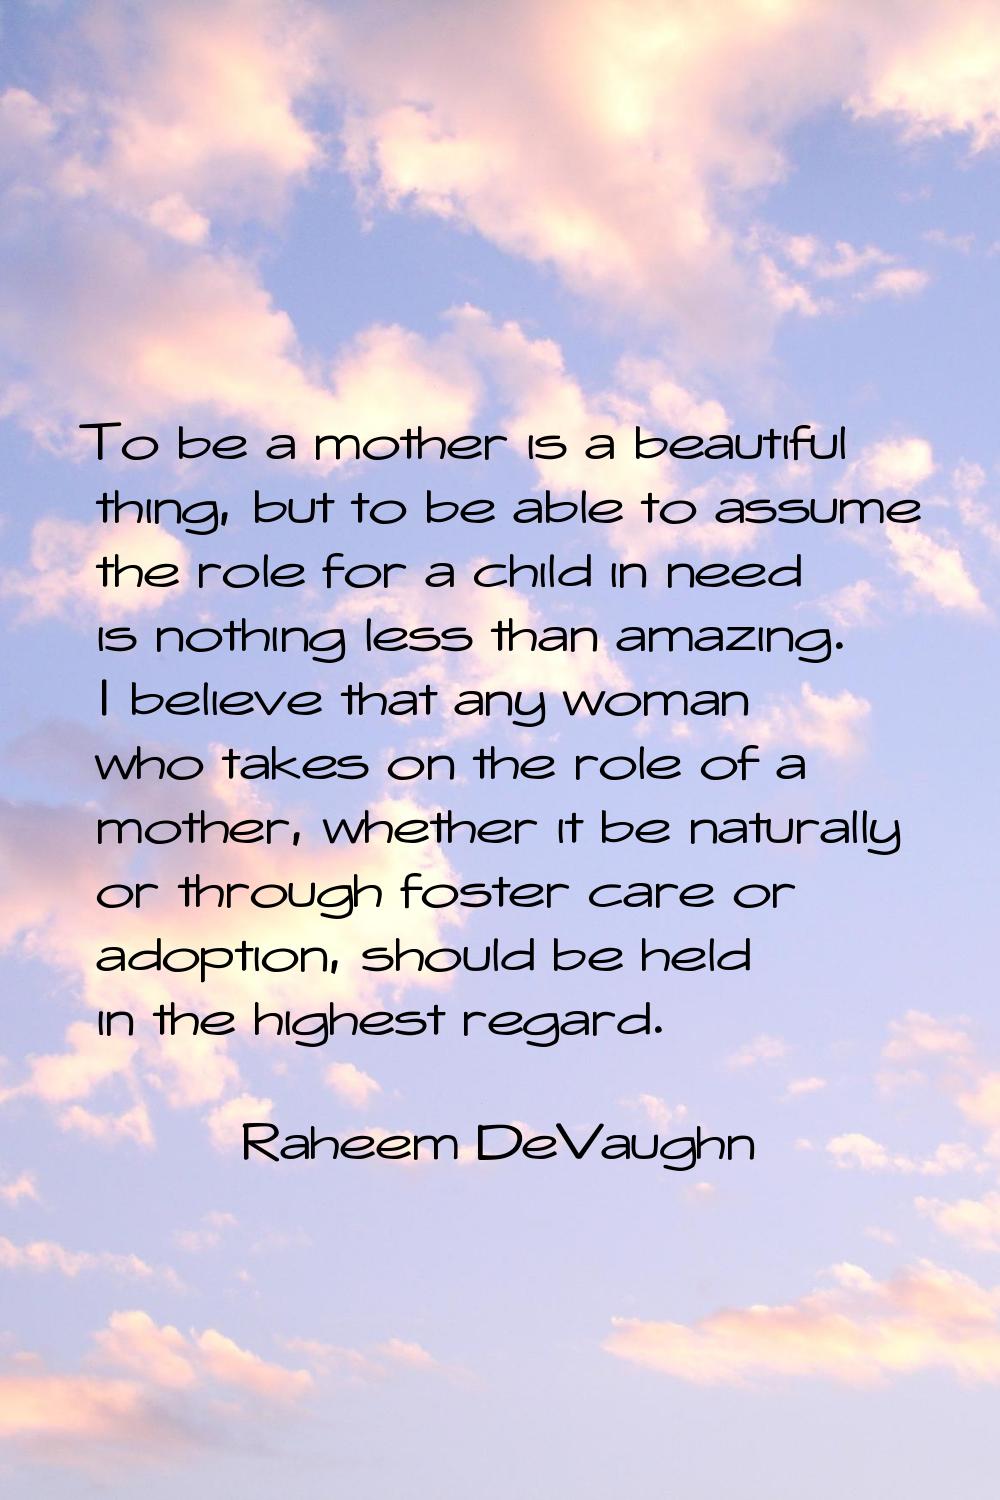 To be a mother is a beautiful thing, but to be able to assume the role for a child in need is nothi